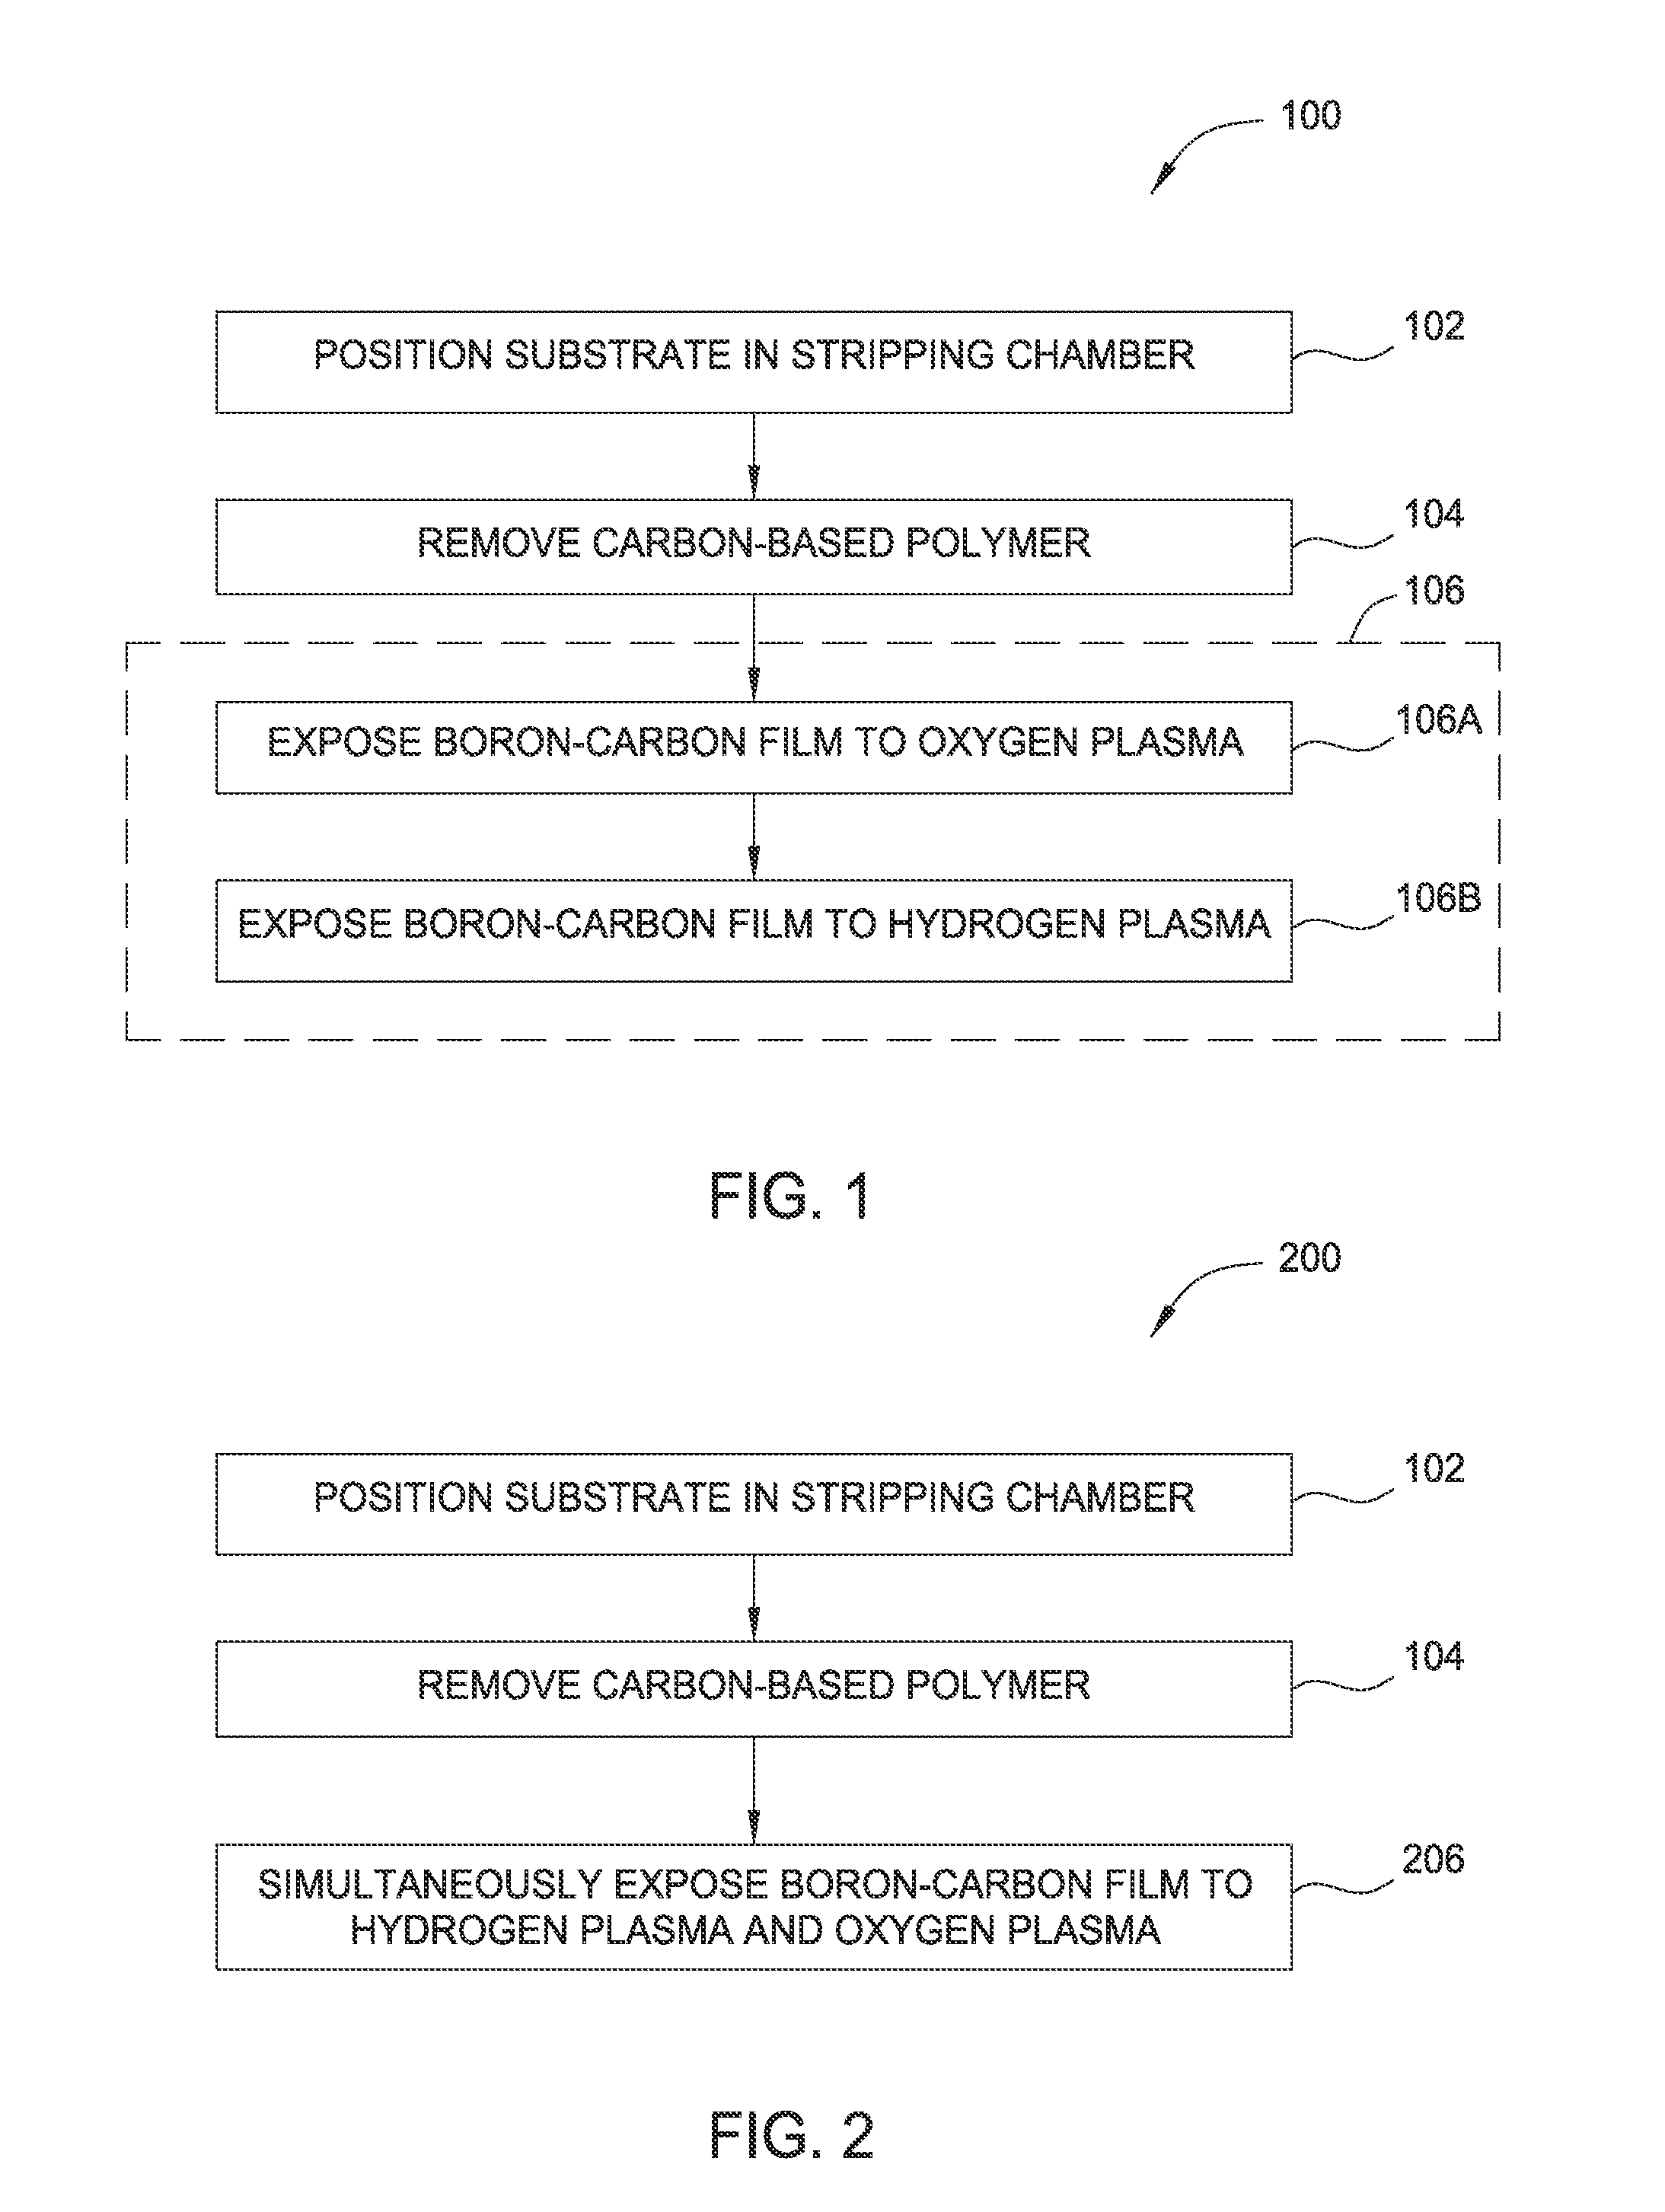 Methods of dry stripping boron-carbon films